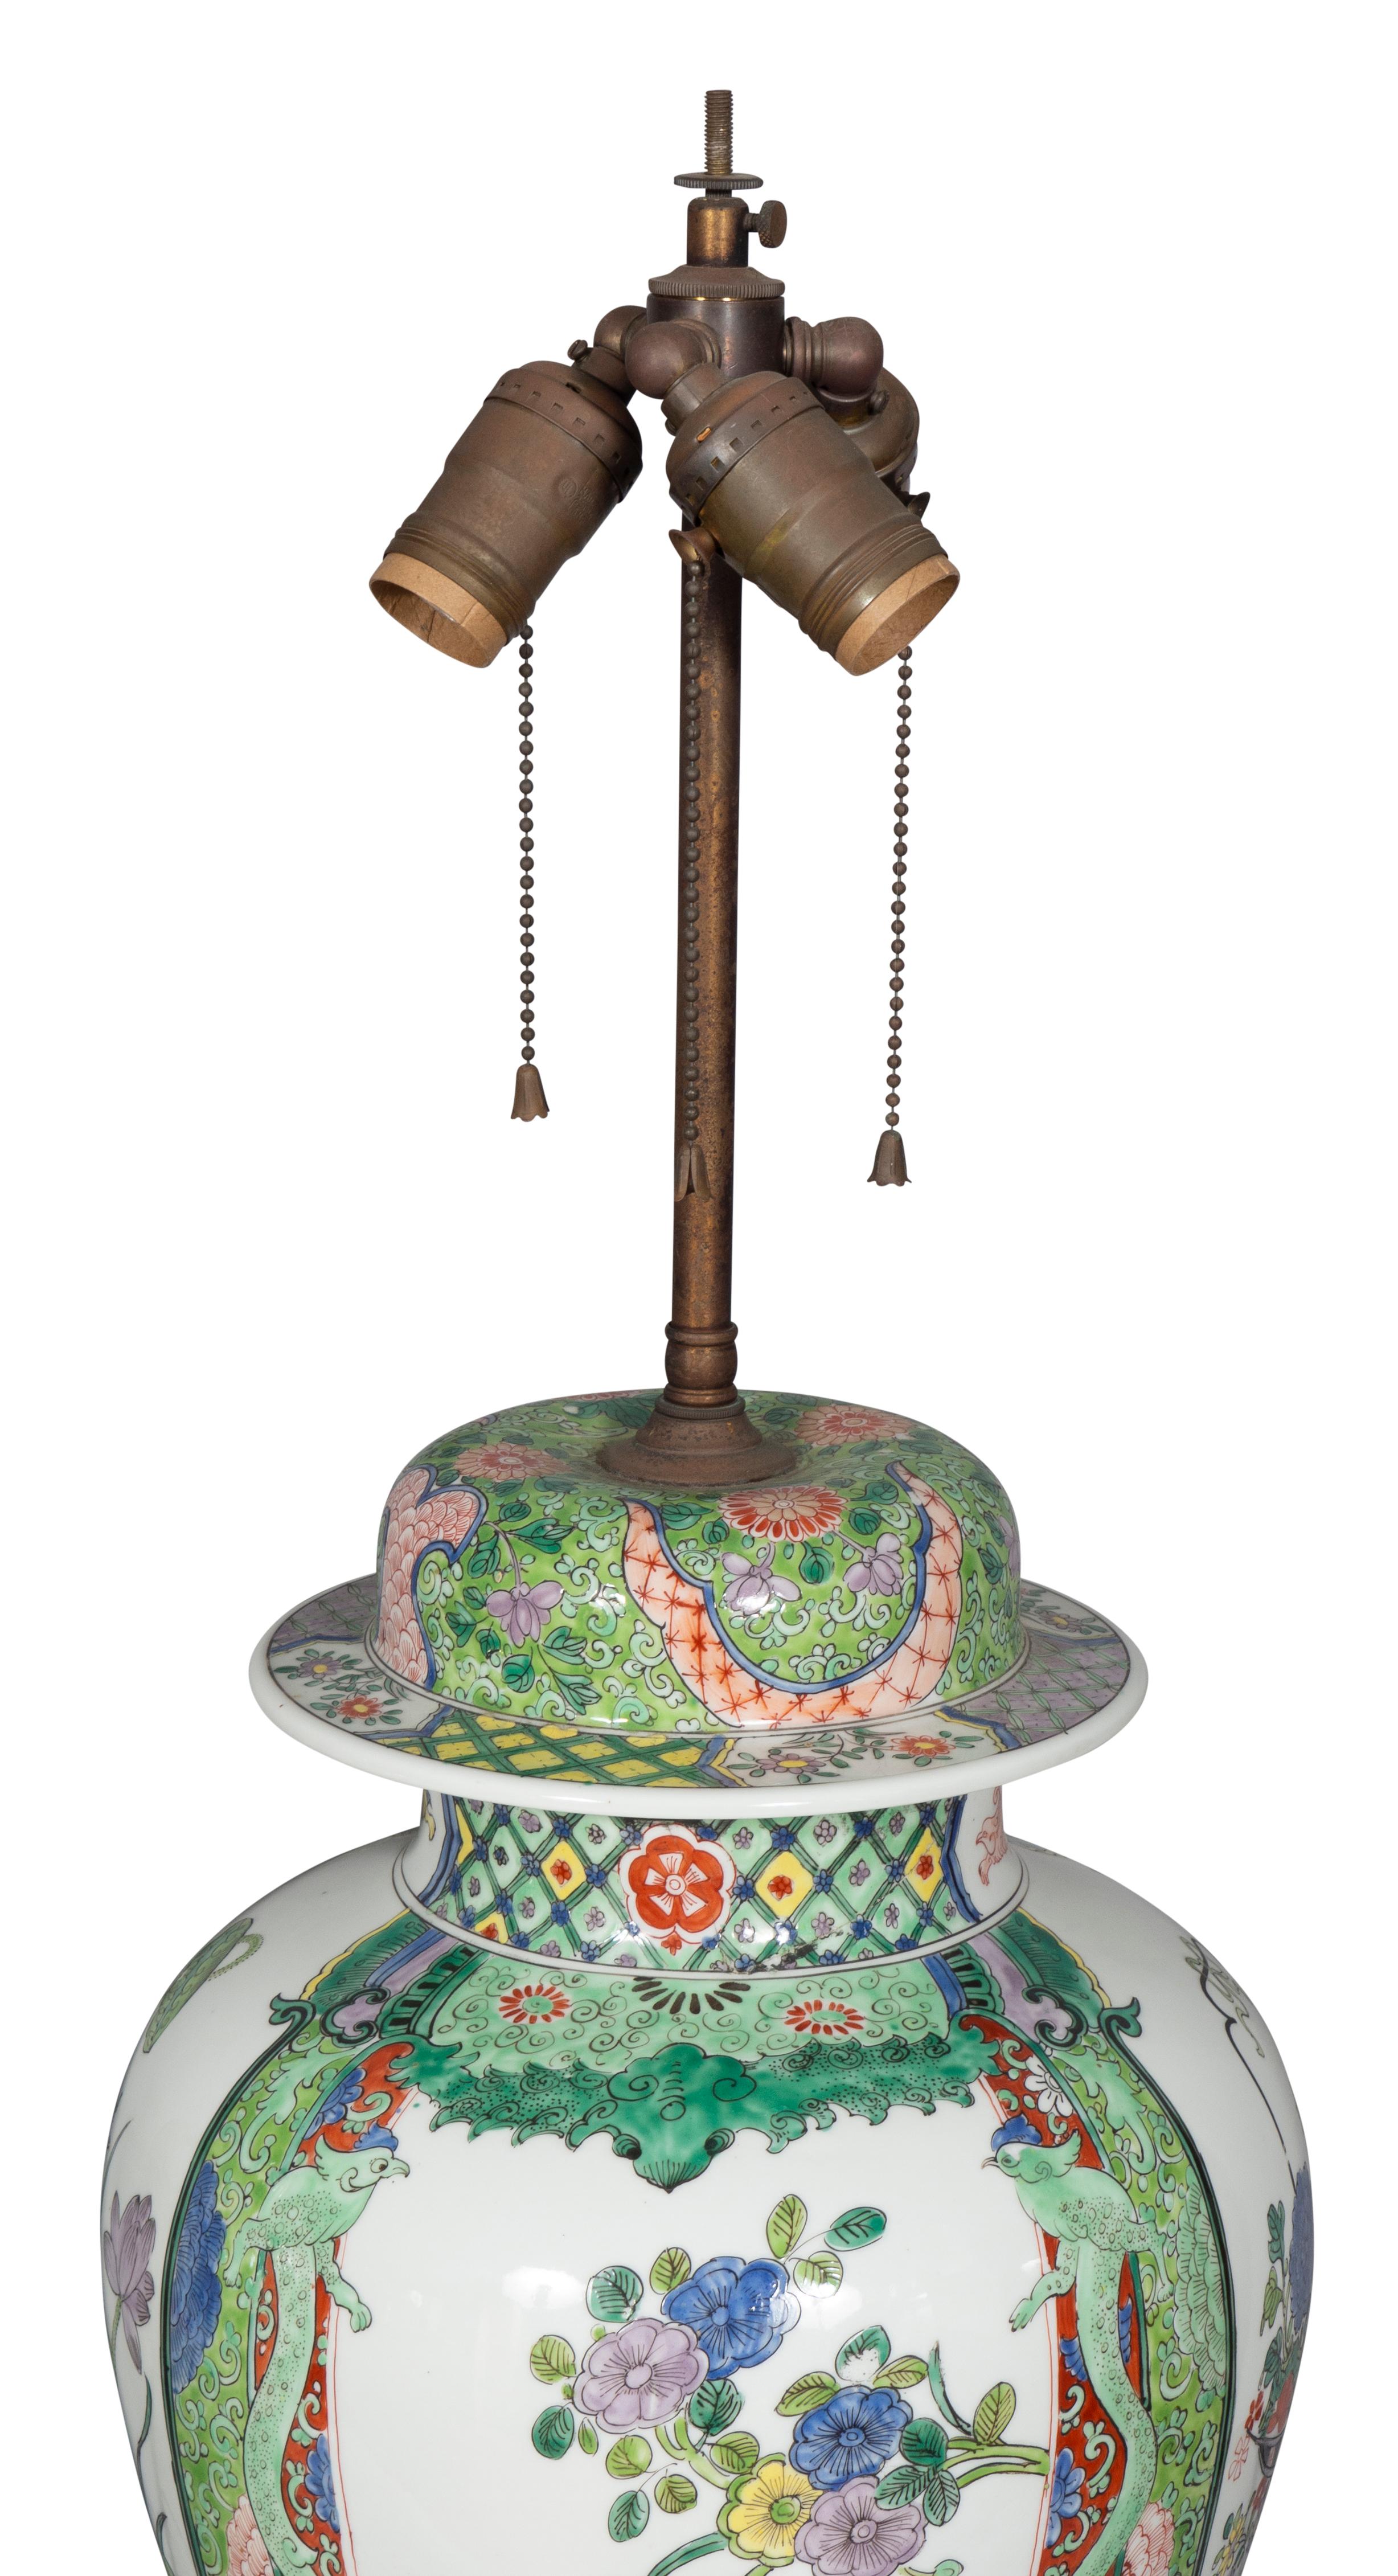 Large scale. Now lamps with domed cover and baluster form body with bronze mounted cover and base. Decorated with aubergine, yellows and greens in the oriental taste. Dick collection Bellevue Ave Newport RI.